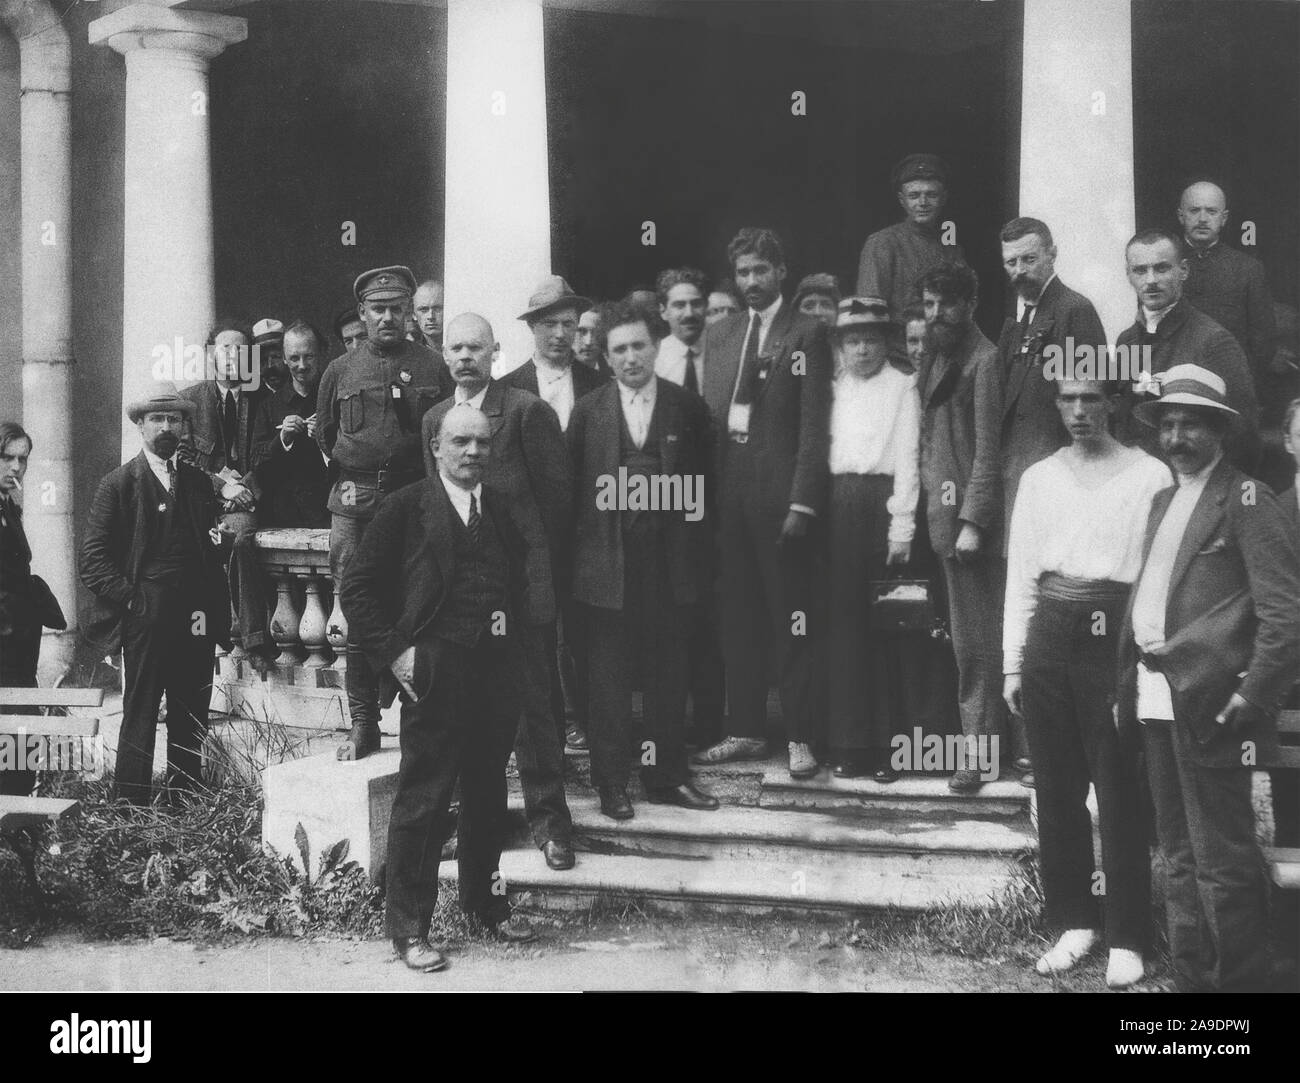 Delegates to the second congress of the Comintern at the Uritsky Palace in Petrograd. The recognized are: Lev Karakhan (second from left), Karl Radek (third, smoking), Nikolai Bukharin (fifth), Mikhail Lashevich (seventh uniform), Maxim Peshkov (Maxim Gorky's son) (behind the column), Maxim Gorky (ninth shaved), Vladimir Lenin (tenth, hands in pockets), Sergey Zorin (eleventh, with hat), Grigory Zinoviev (thirteenth, hands behind his back), Charles Shipman (Jesús Ramírez) (white shirt and tie), M.N. Roy (coat and tie), Maria Ulyanova (nineteenth, white blouse), Nicola Bombacci (with beard) and Stock Photo